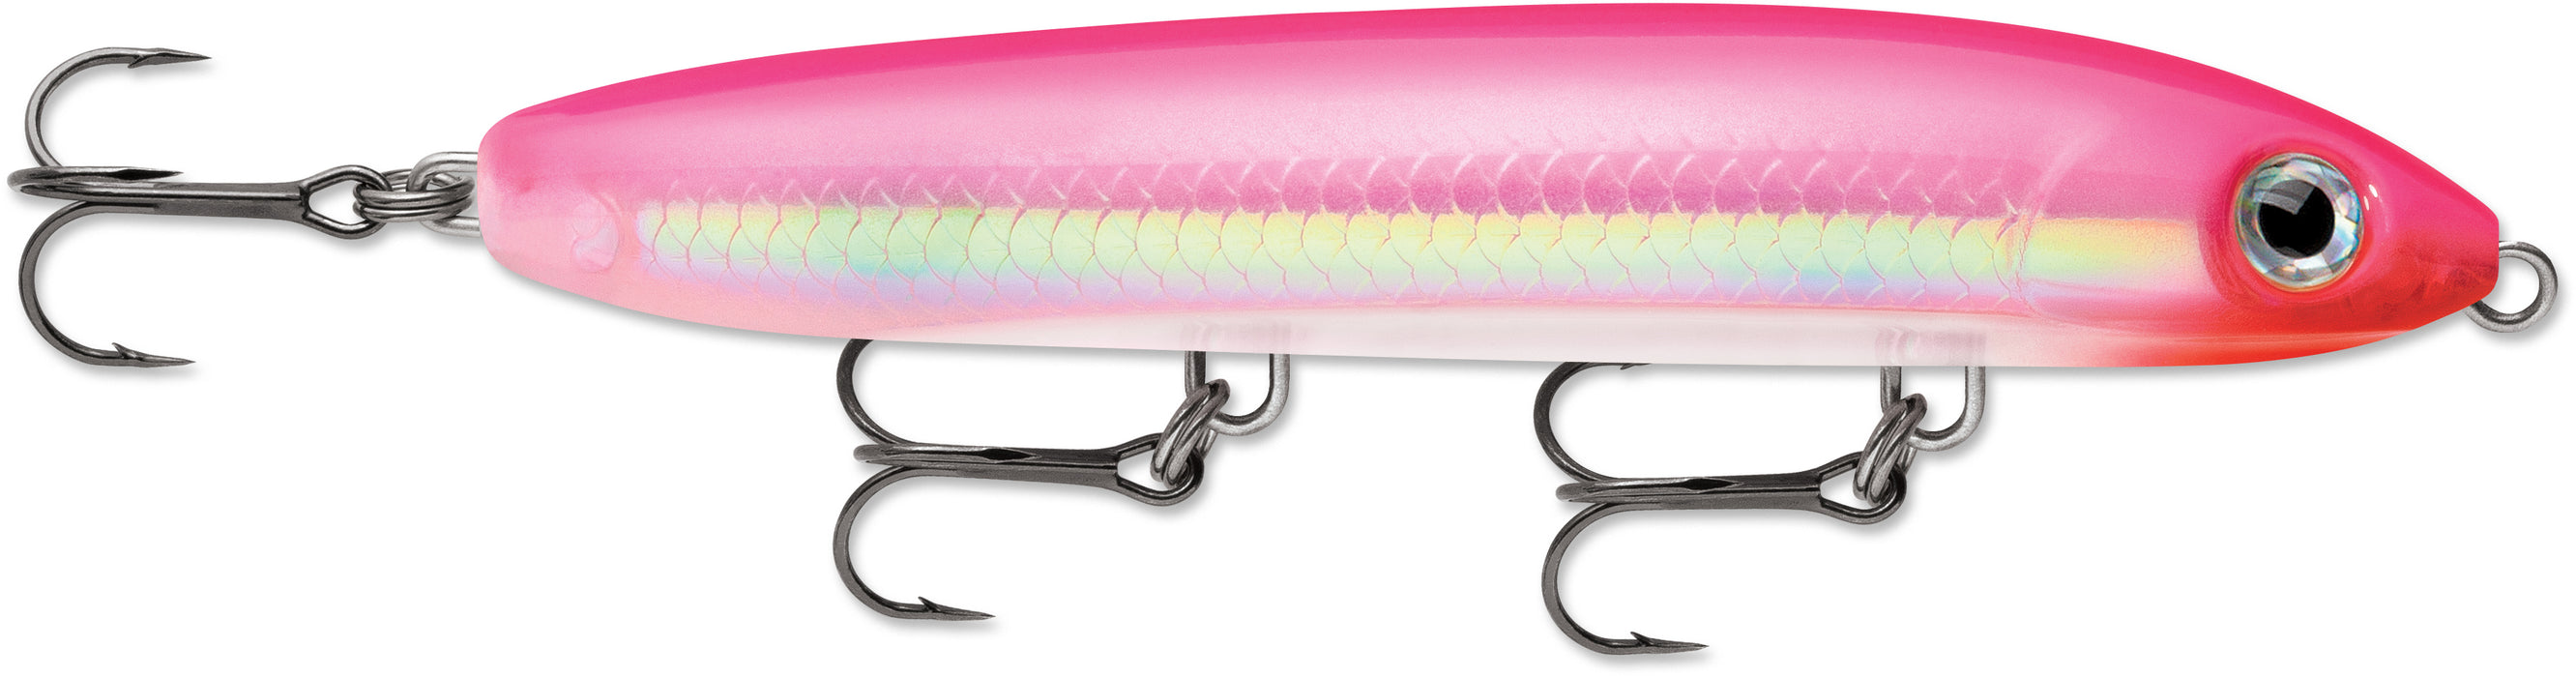 5 D-J LURES Custom Silicone Spinnerbait Skirts(Red/White Glitter)-Bass  Fishing $5.25 - PicClick